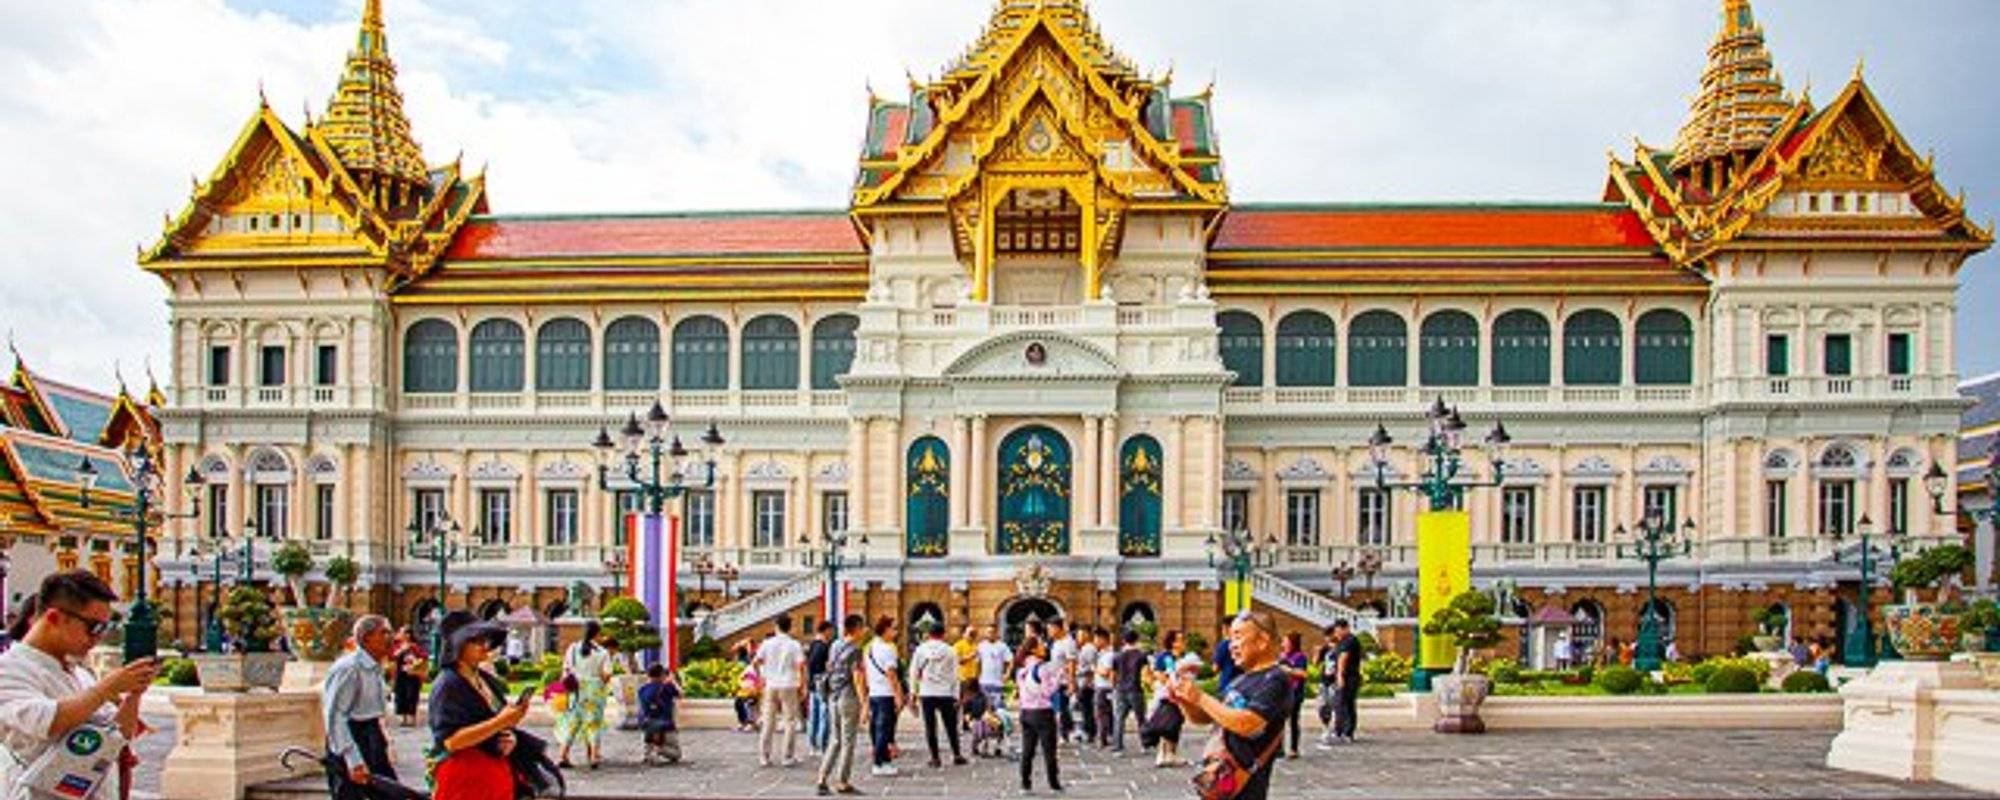 My accidental visit to the Grand Palace complex and the surrounding vicinity.